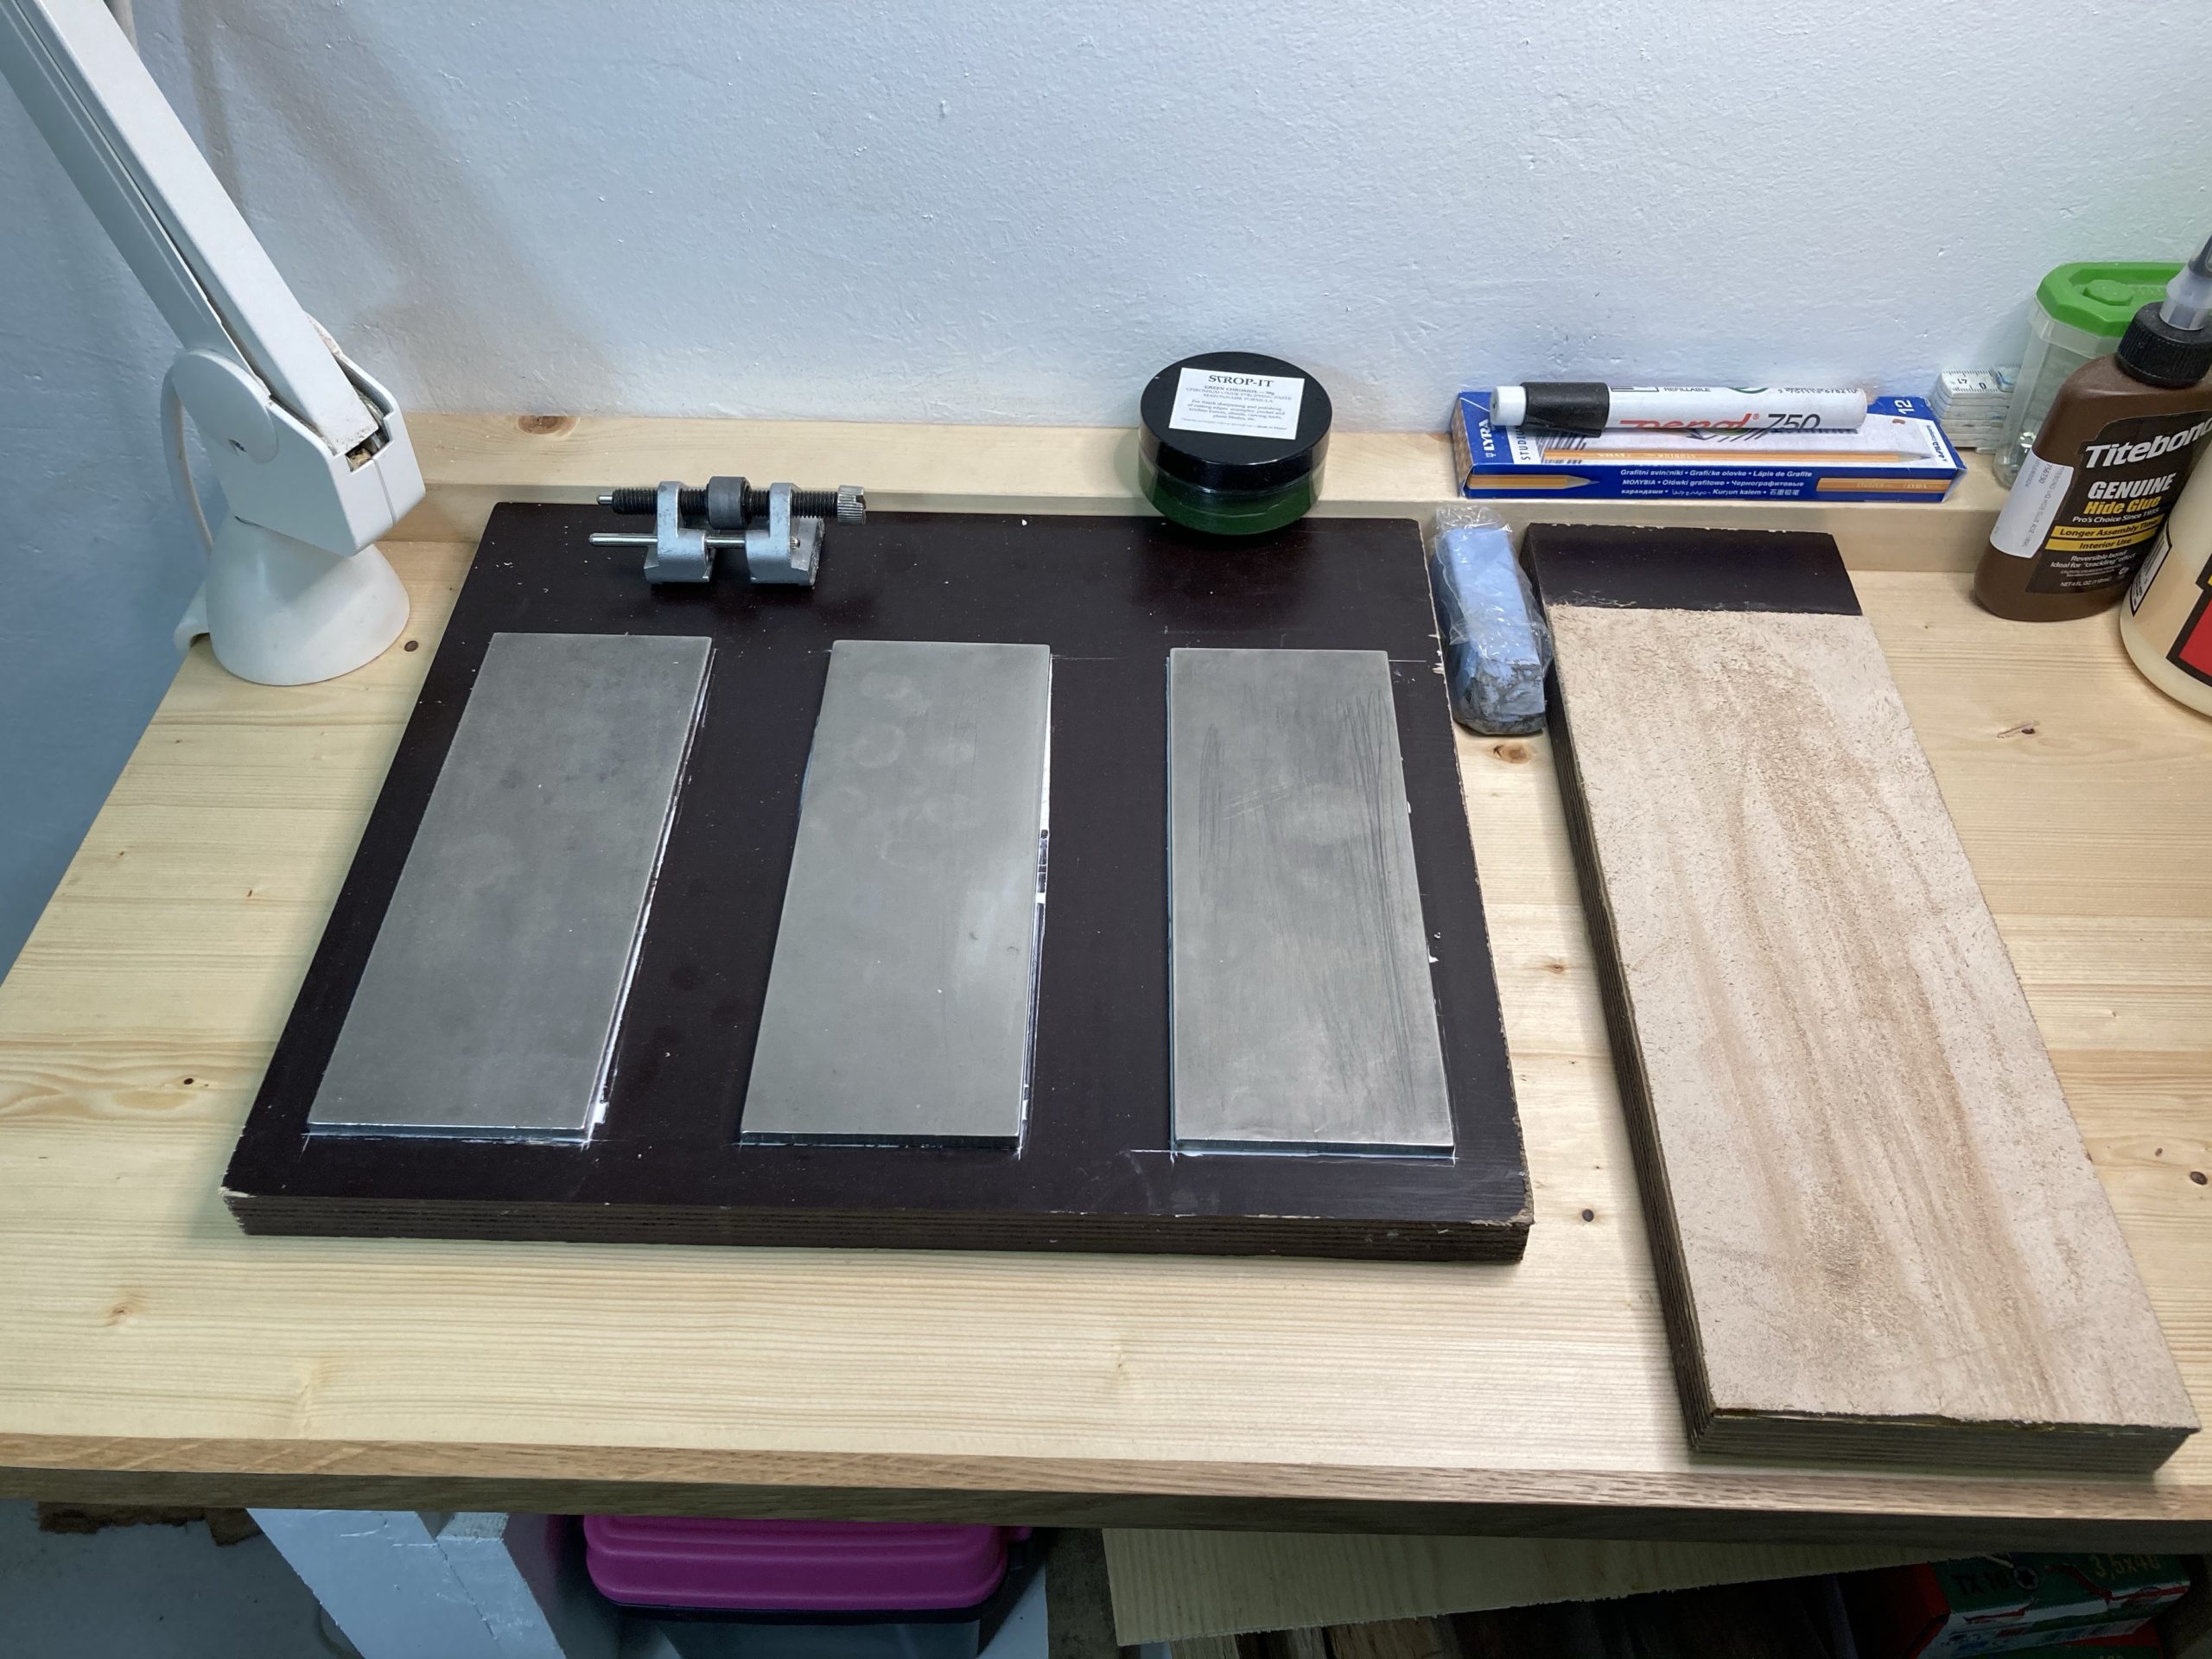 Multi-Purpose Sharpening Station, Woodworking Project